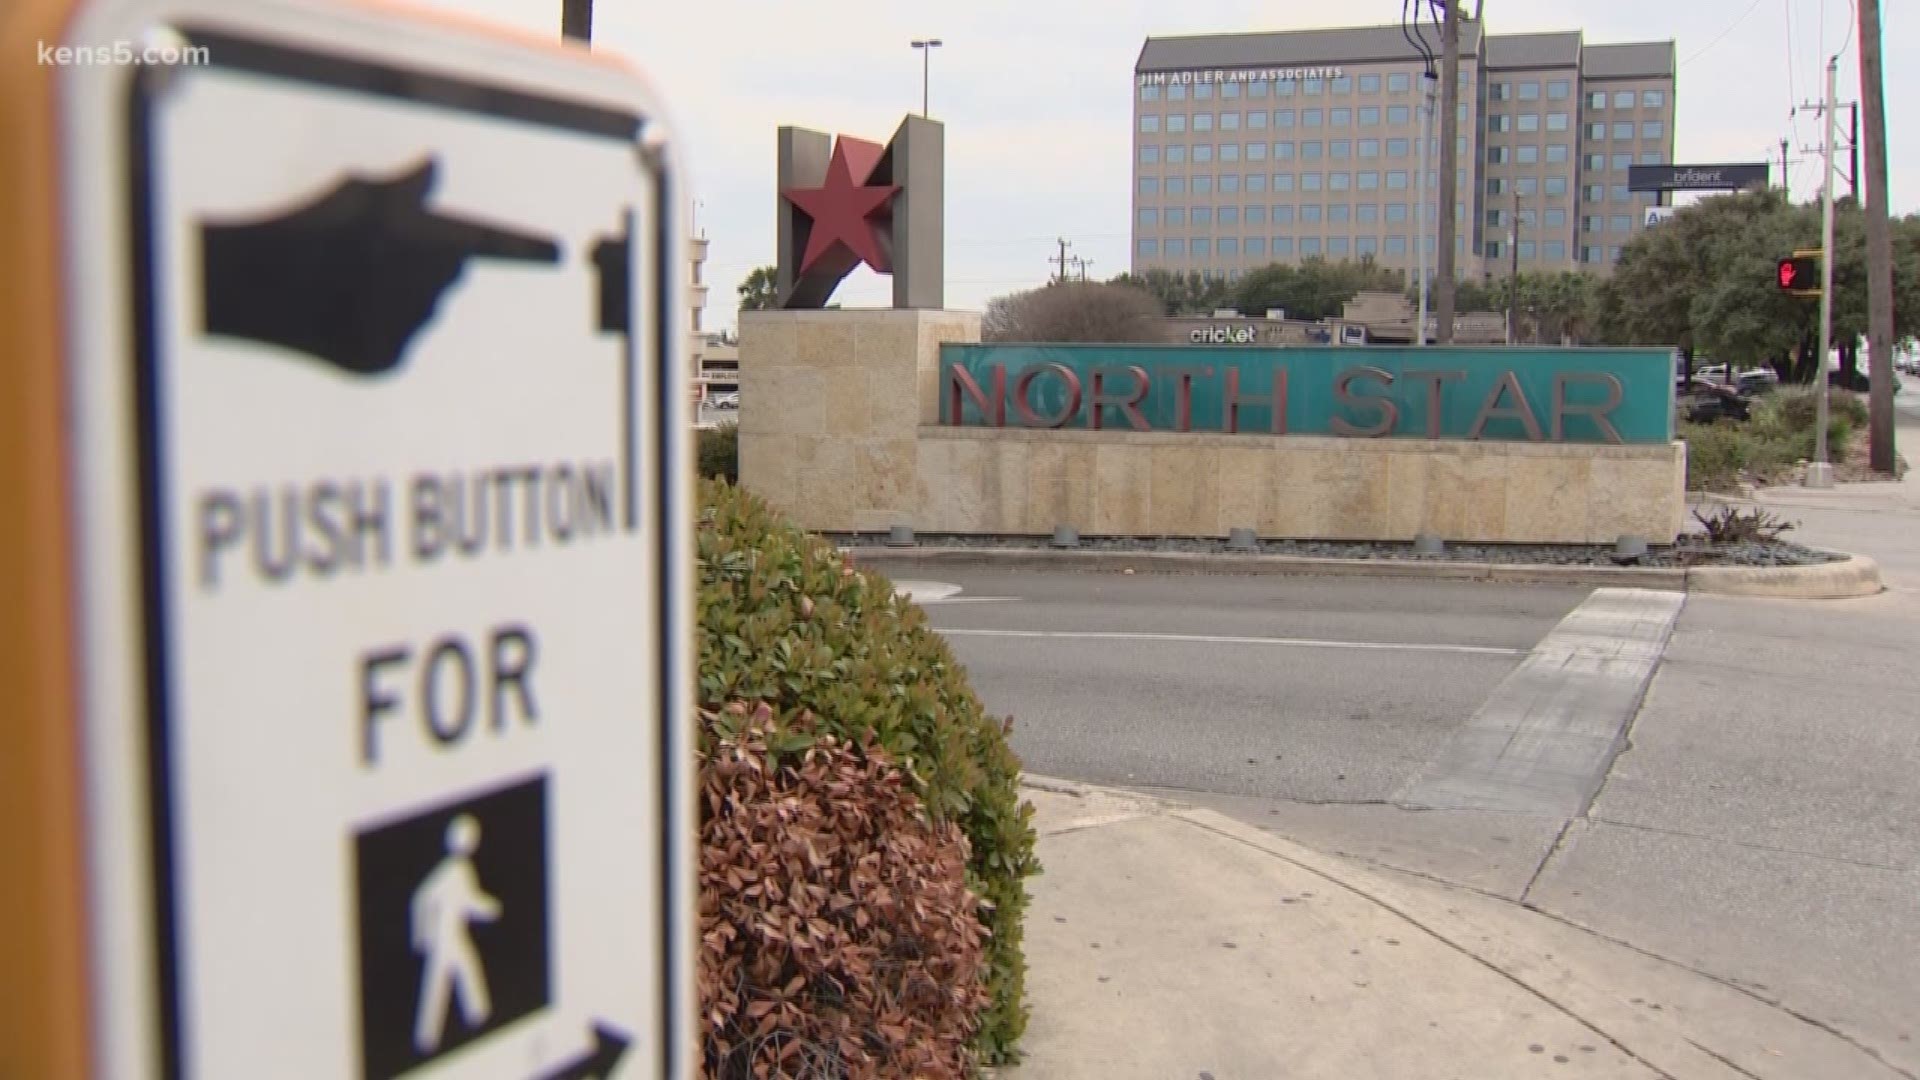 Metro Health says the woman checked into a Holiday Inn and used a hotel shuttle to visit North Star Mall after being released from coronavirus quarantine.